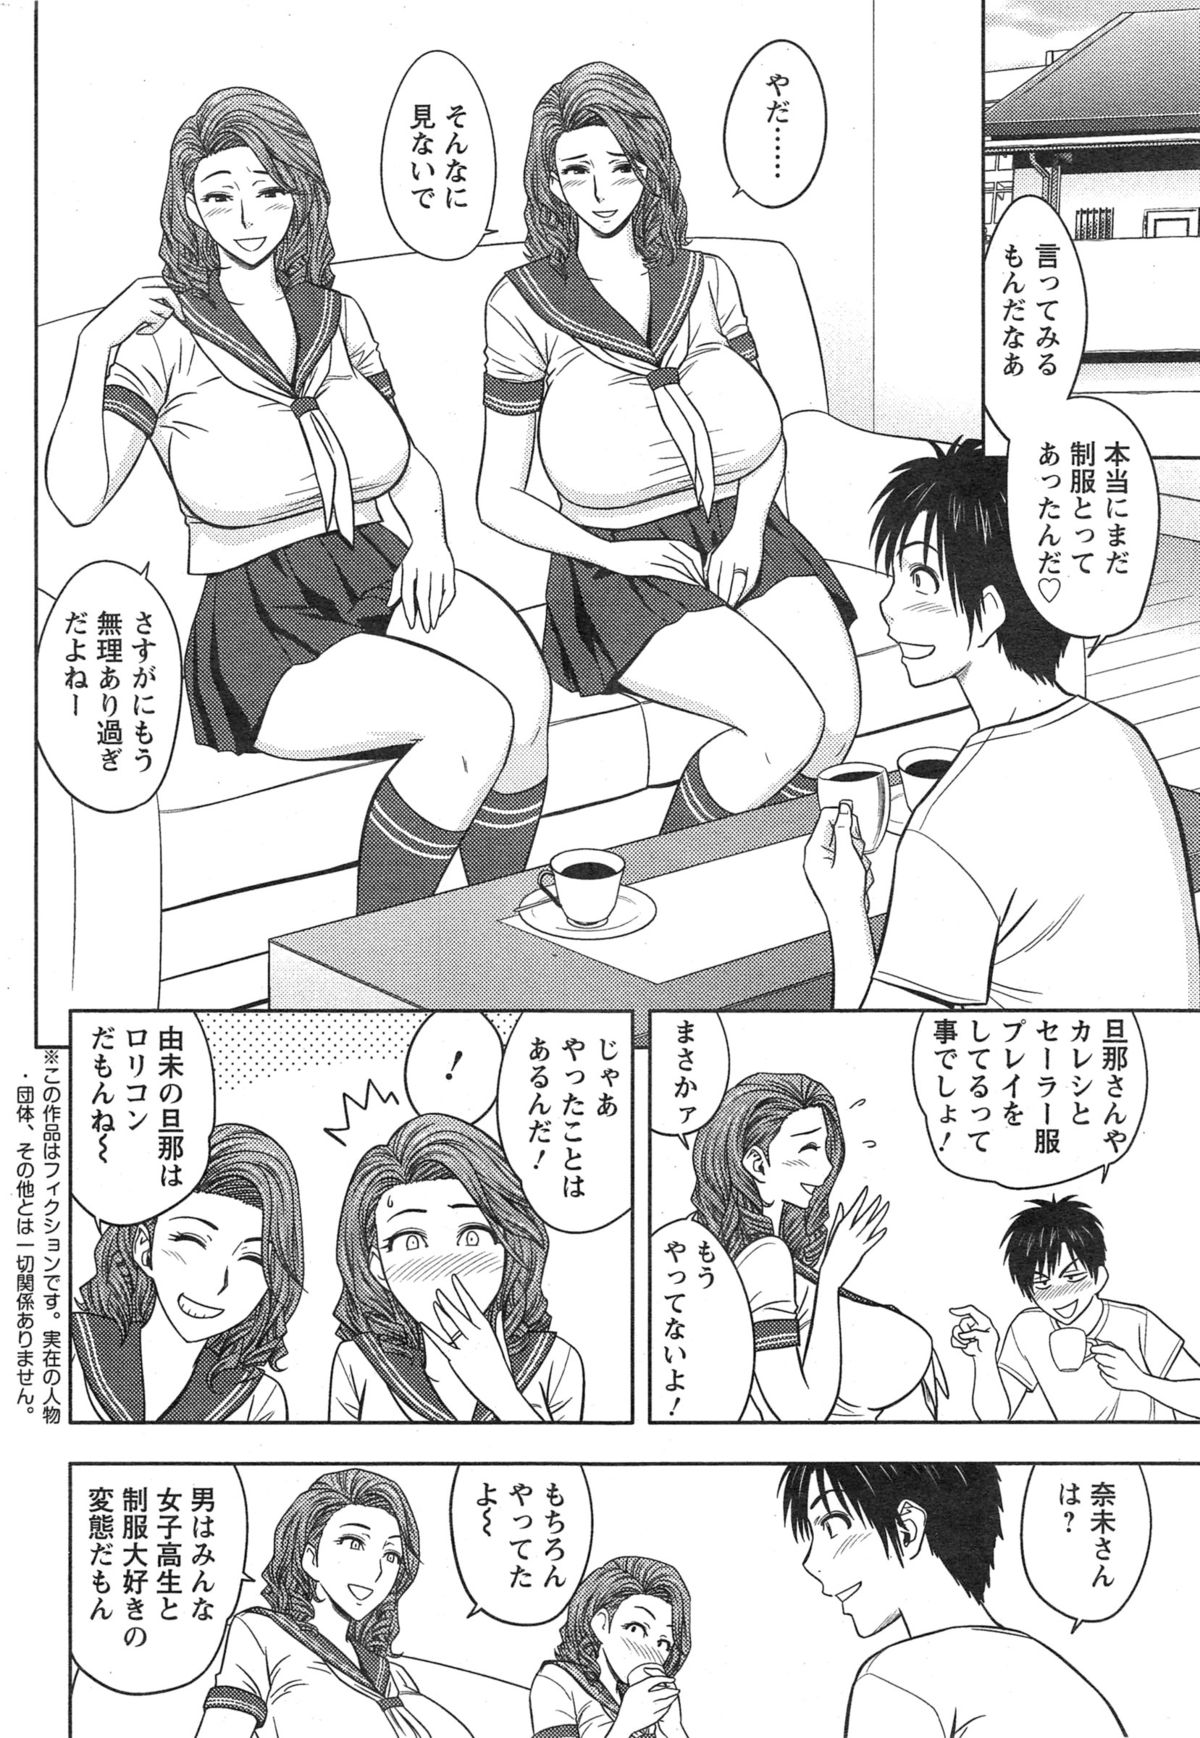 Action Pizazz Cgumi 2015-02 page 30 full